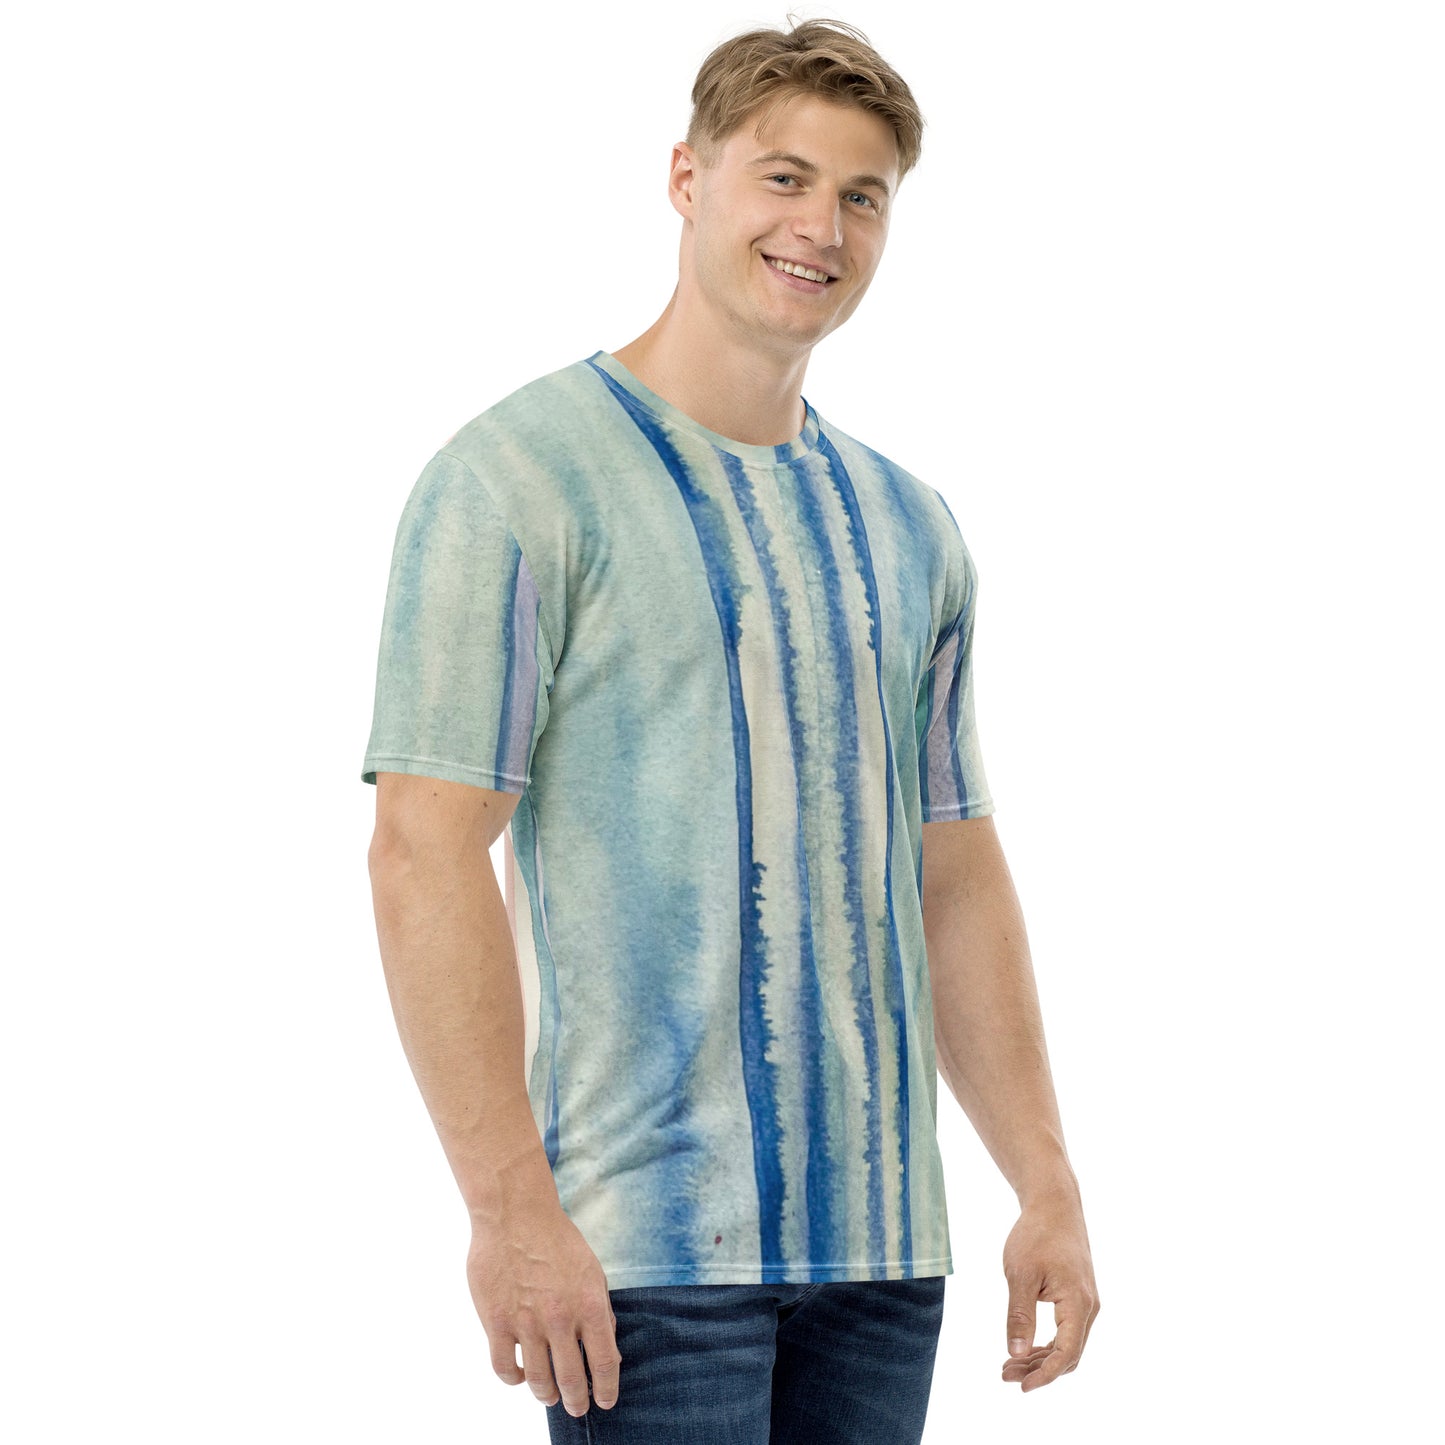 Men's Climate Stripes All over t-shirt